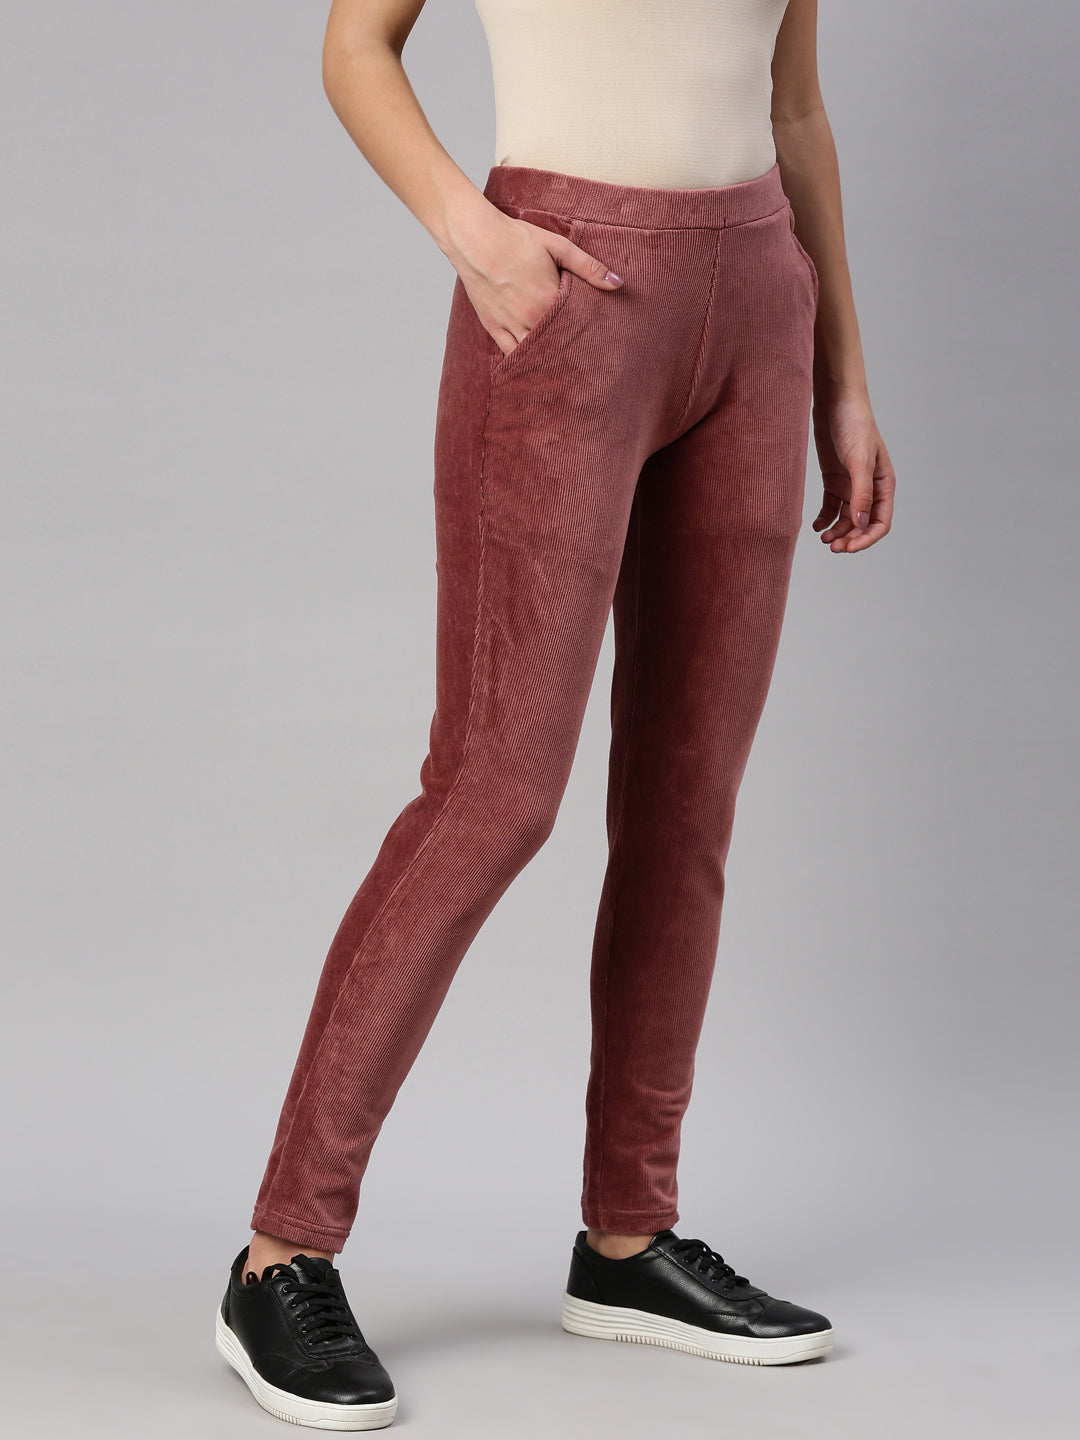 Buy GO COLORS Rust Womens Printed Mid Rise Jeggings